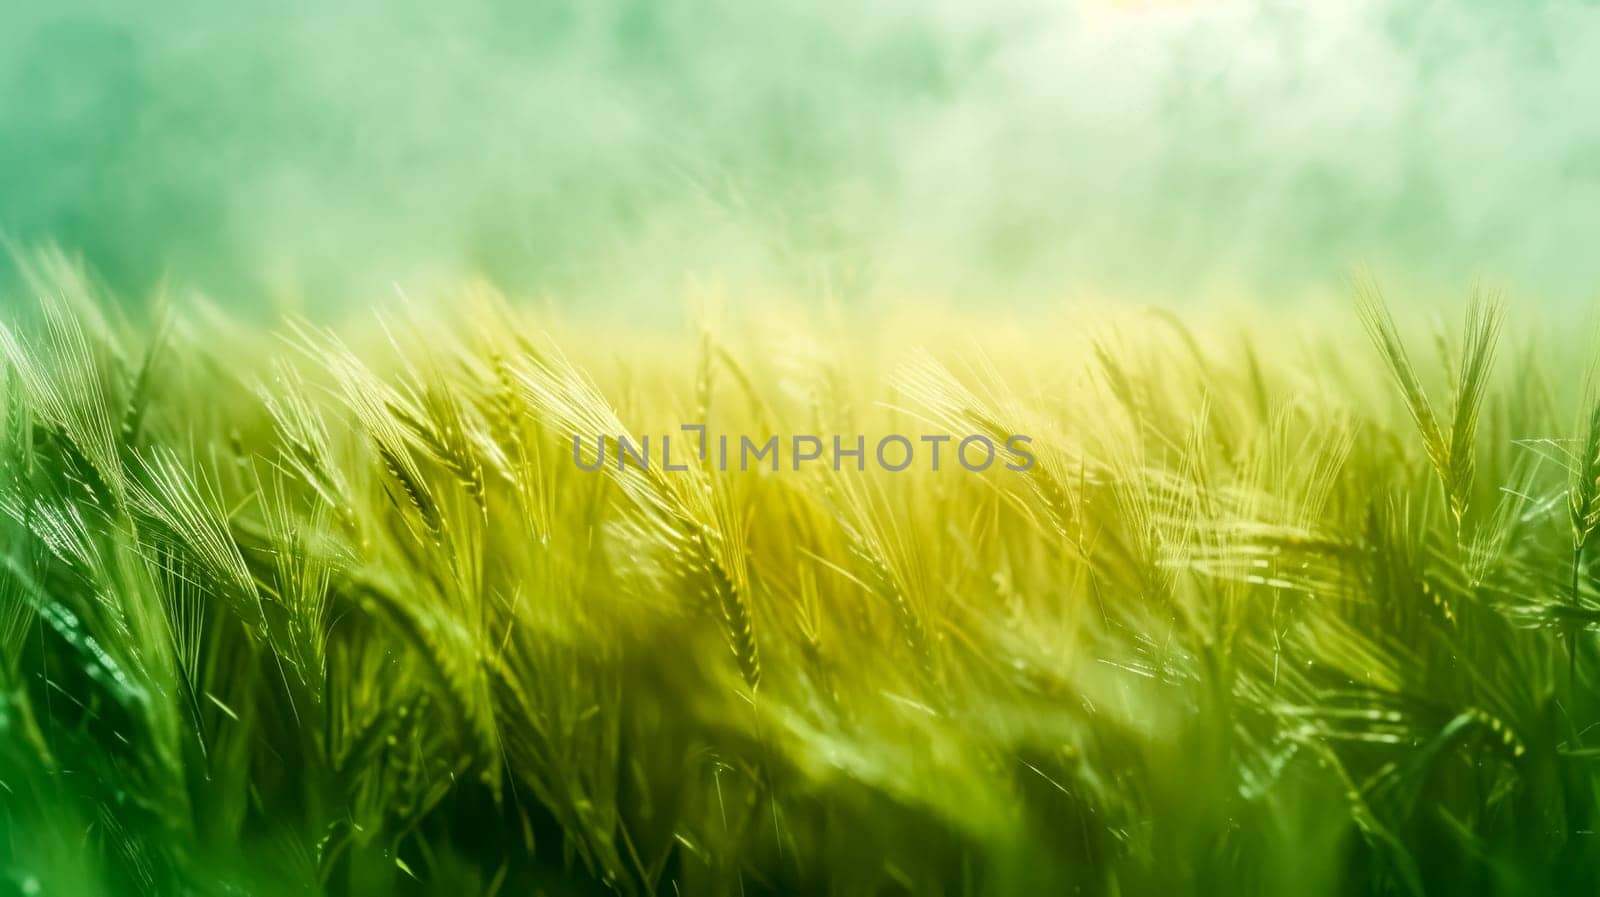 Close-up of a wheat field with sun rays piercing through, depicting a fresh morning